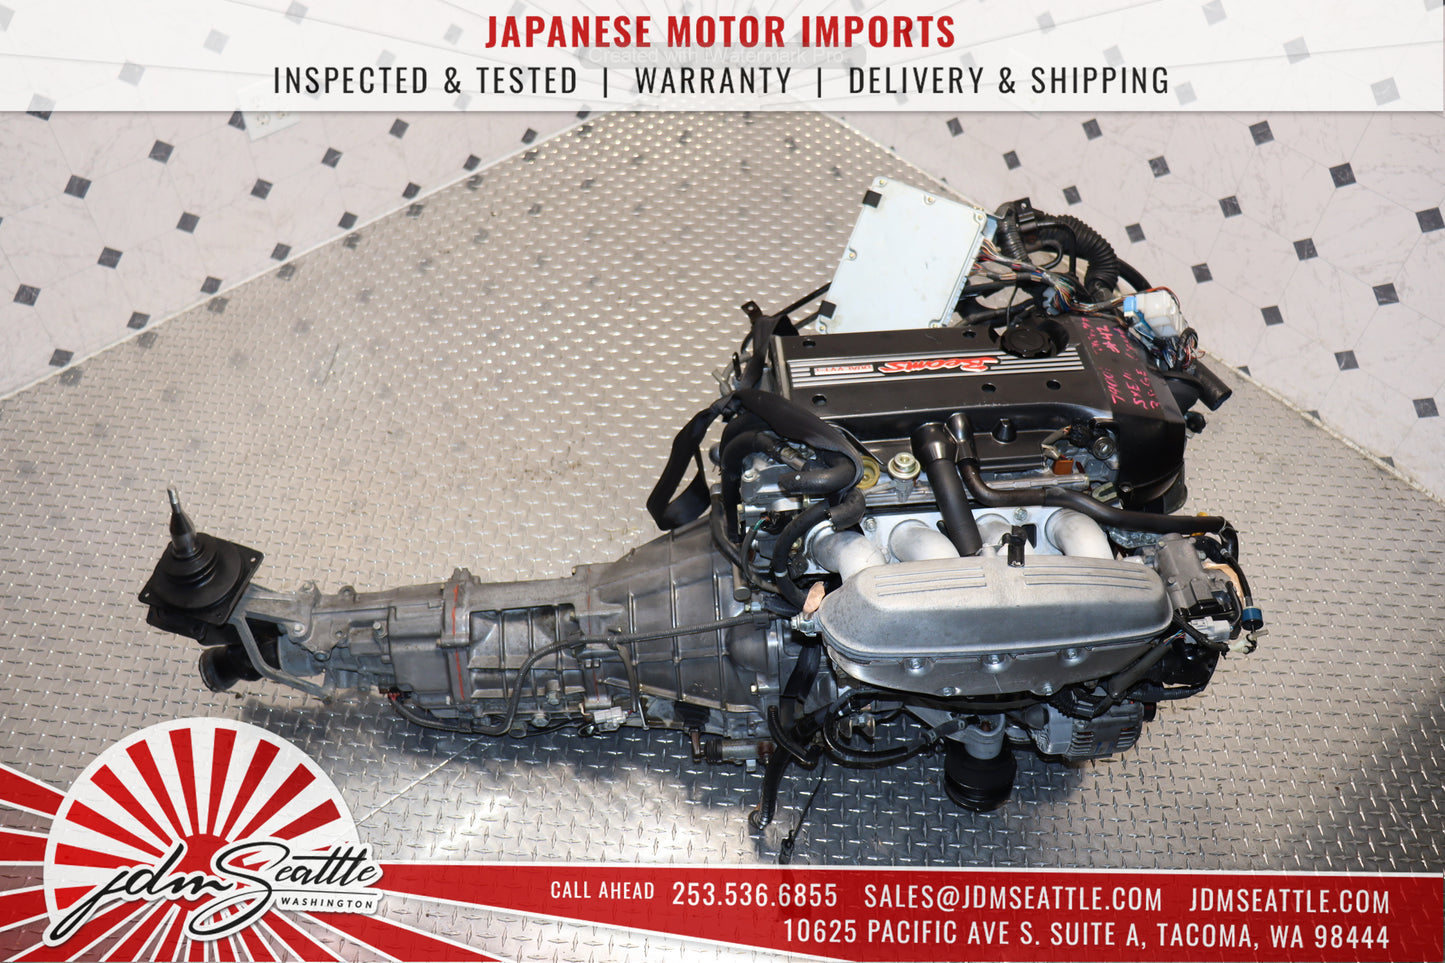 JDM 3SGE BEAMS TOYOTA ALTEZZA IS300 VVTI ENGINE WITH 6 SPEED TRANSMISSION